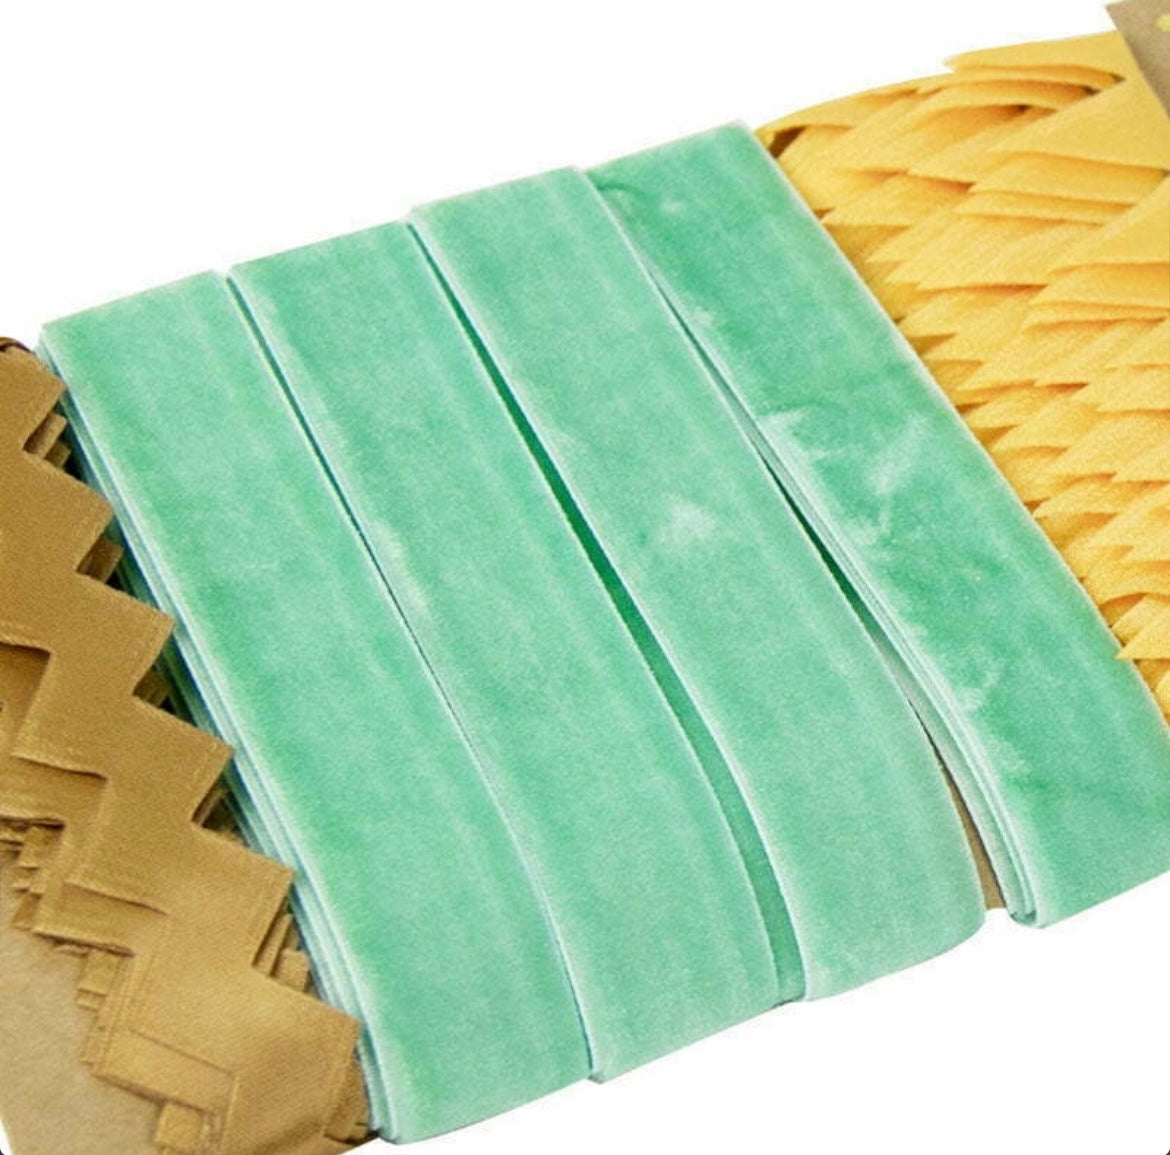 Gift Wrapping Ribbon - Green, Yellow & Gold